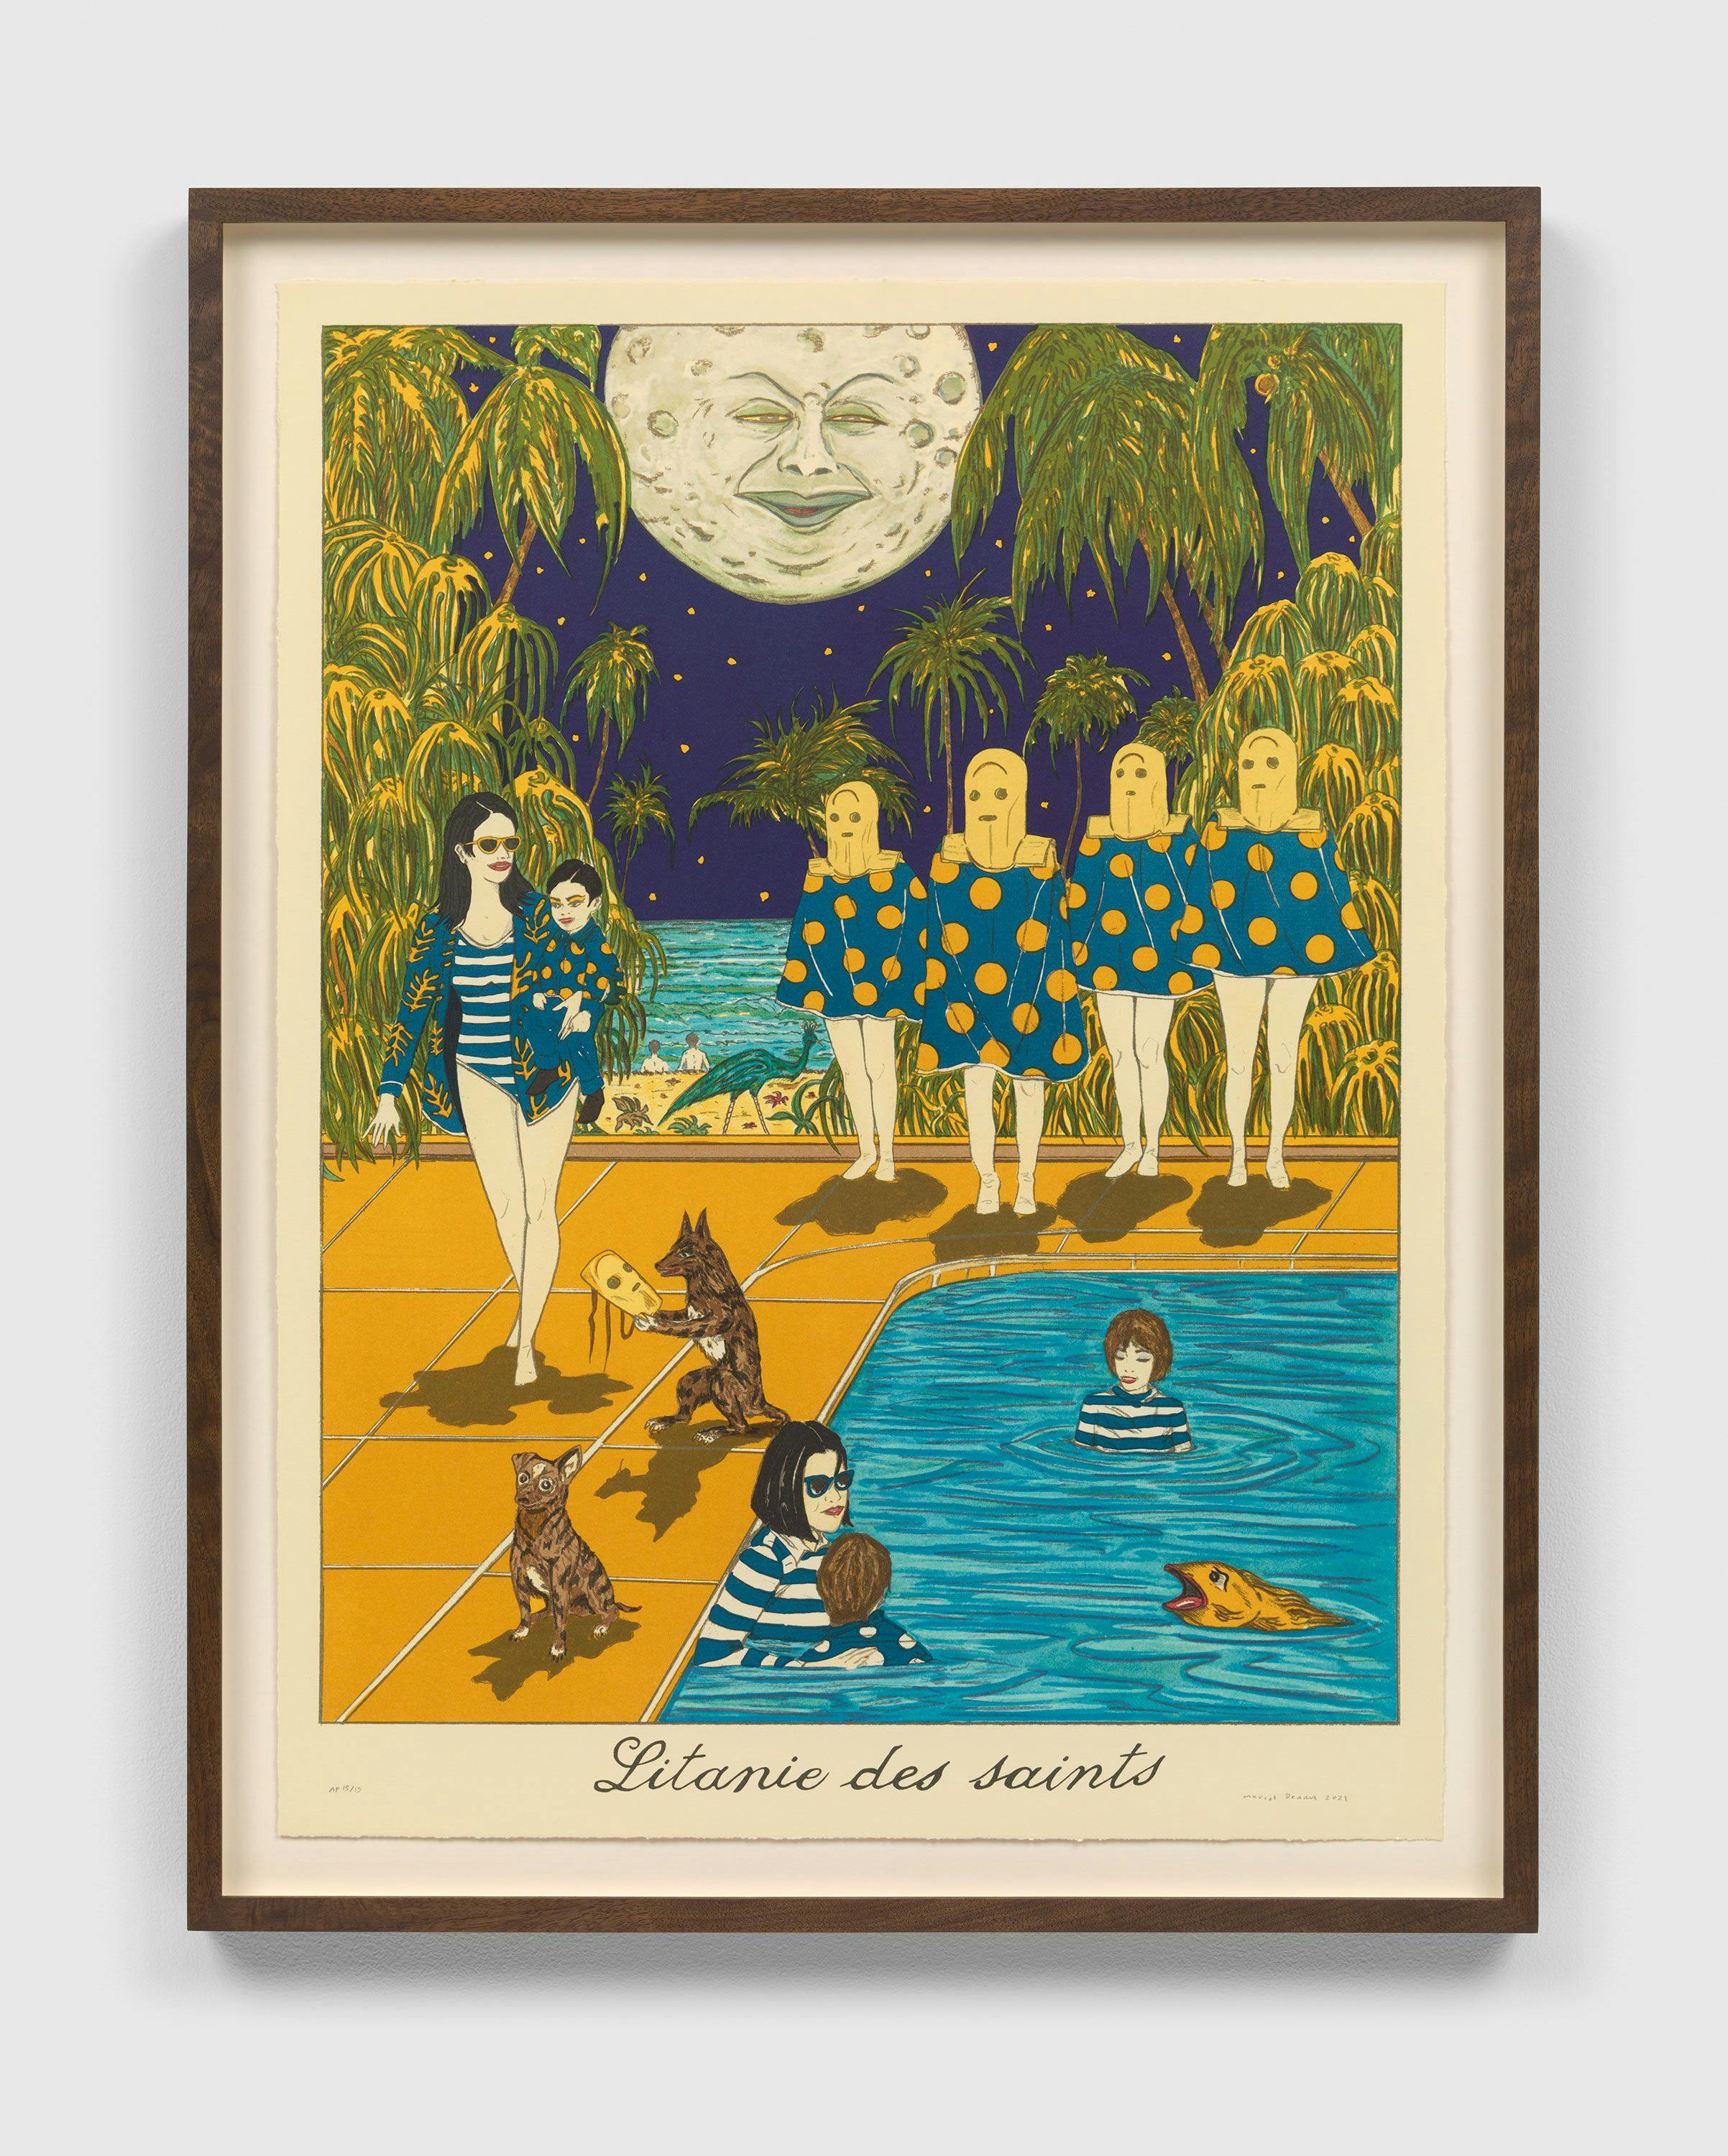 A print by Marcel Dzama, titled Under for opening eyelids of the moon, dated 2021.